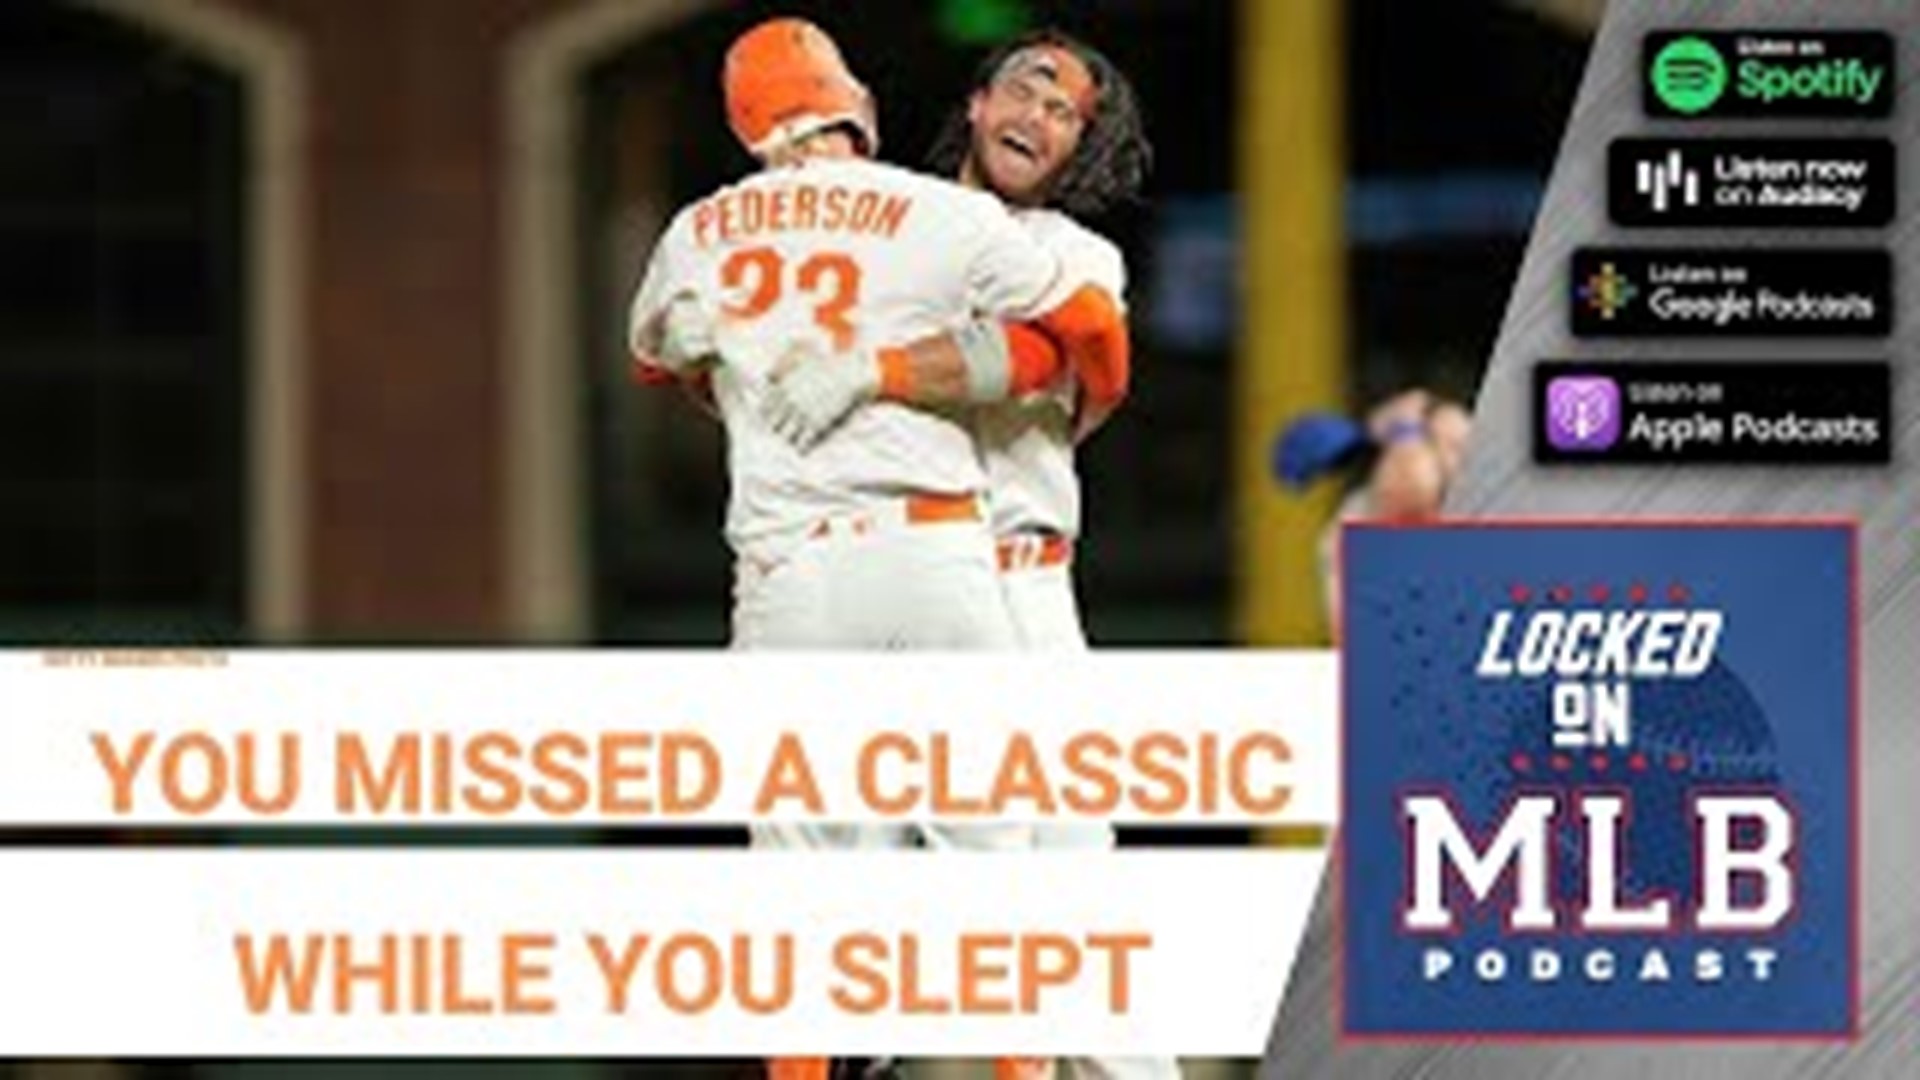 The Giants and Mets Played A Classic While You Slept - Locked on MLB - May 25, 2022